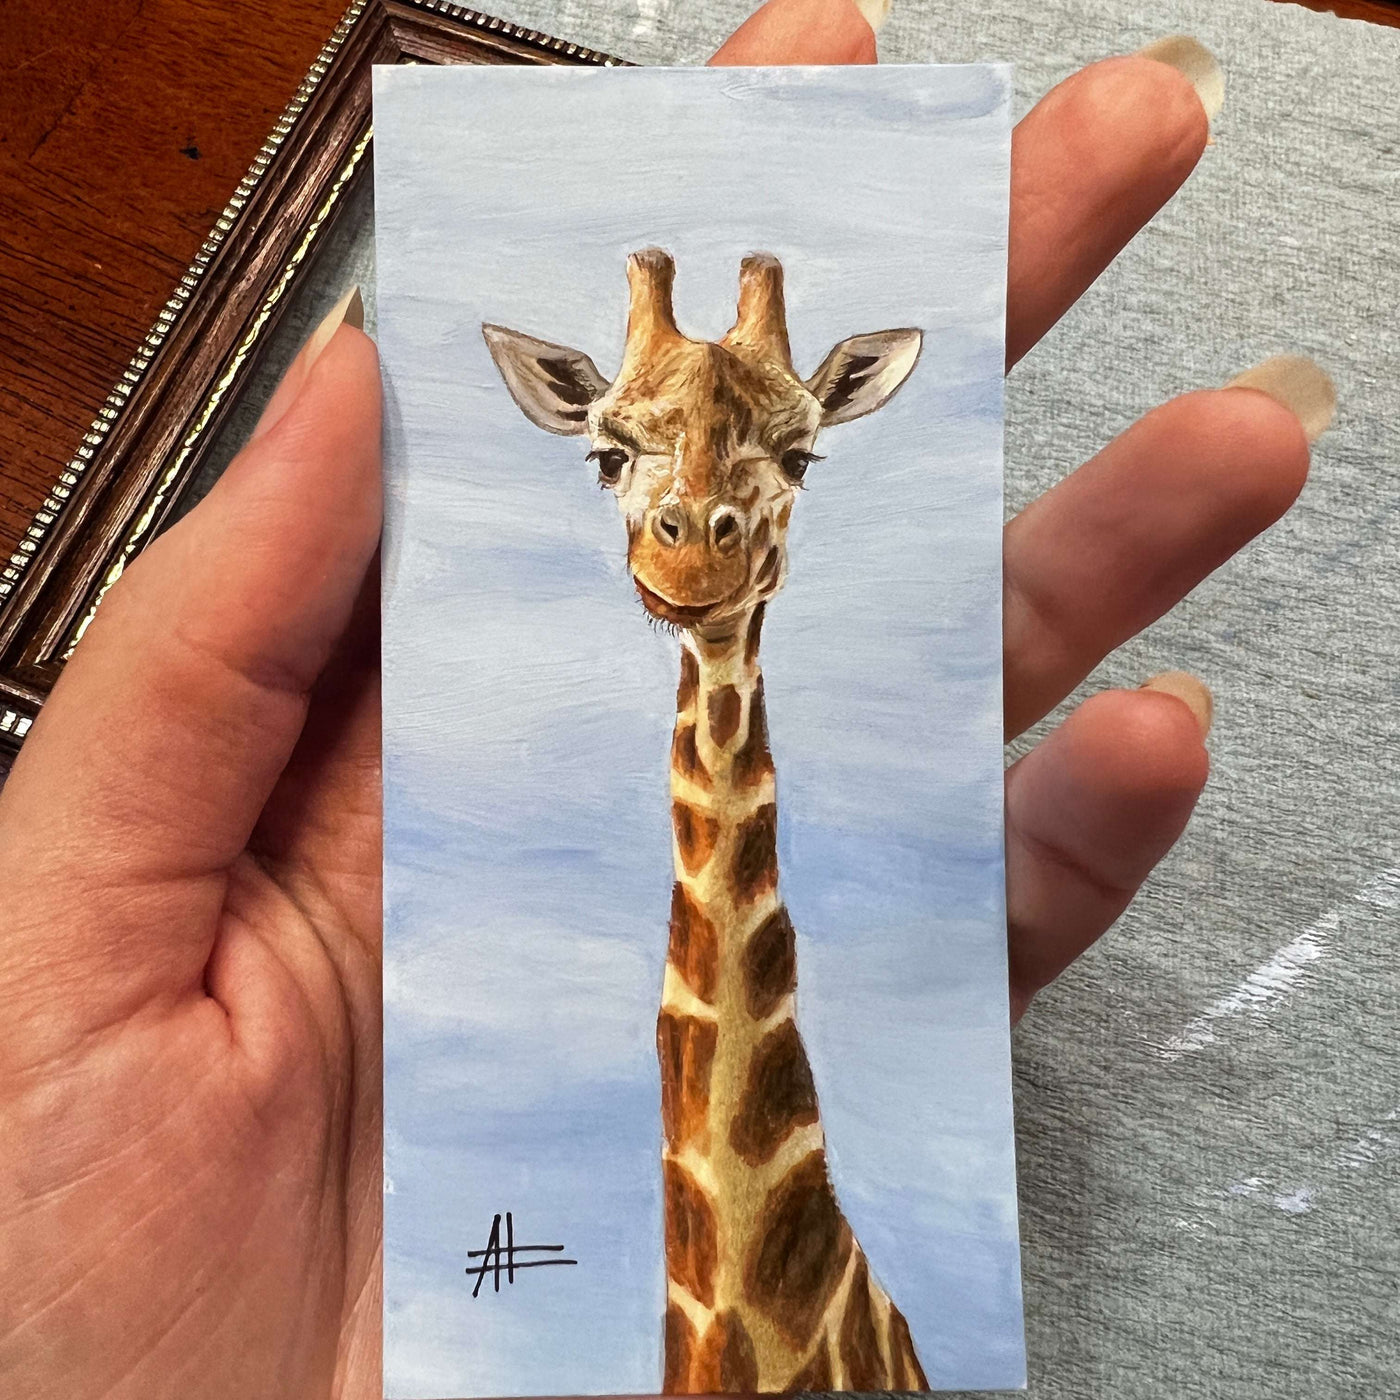 Hand holding a small giraffe painting, showcasing the giraffe's long neck and kind expression.